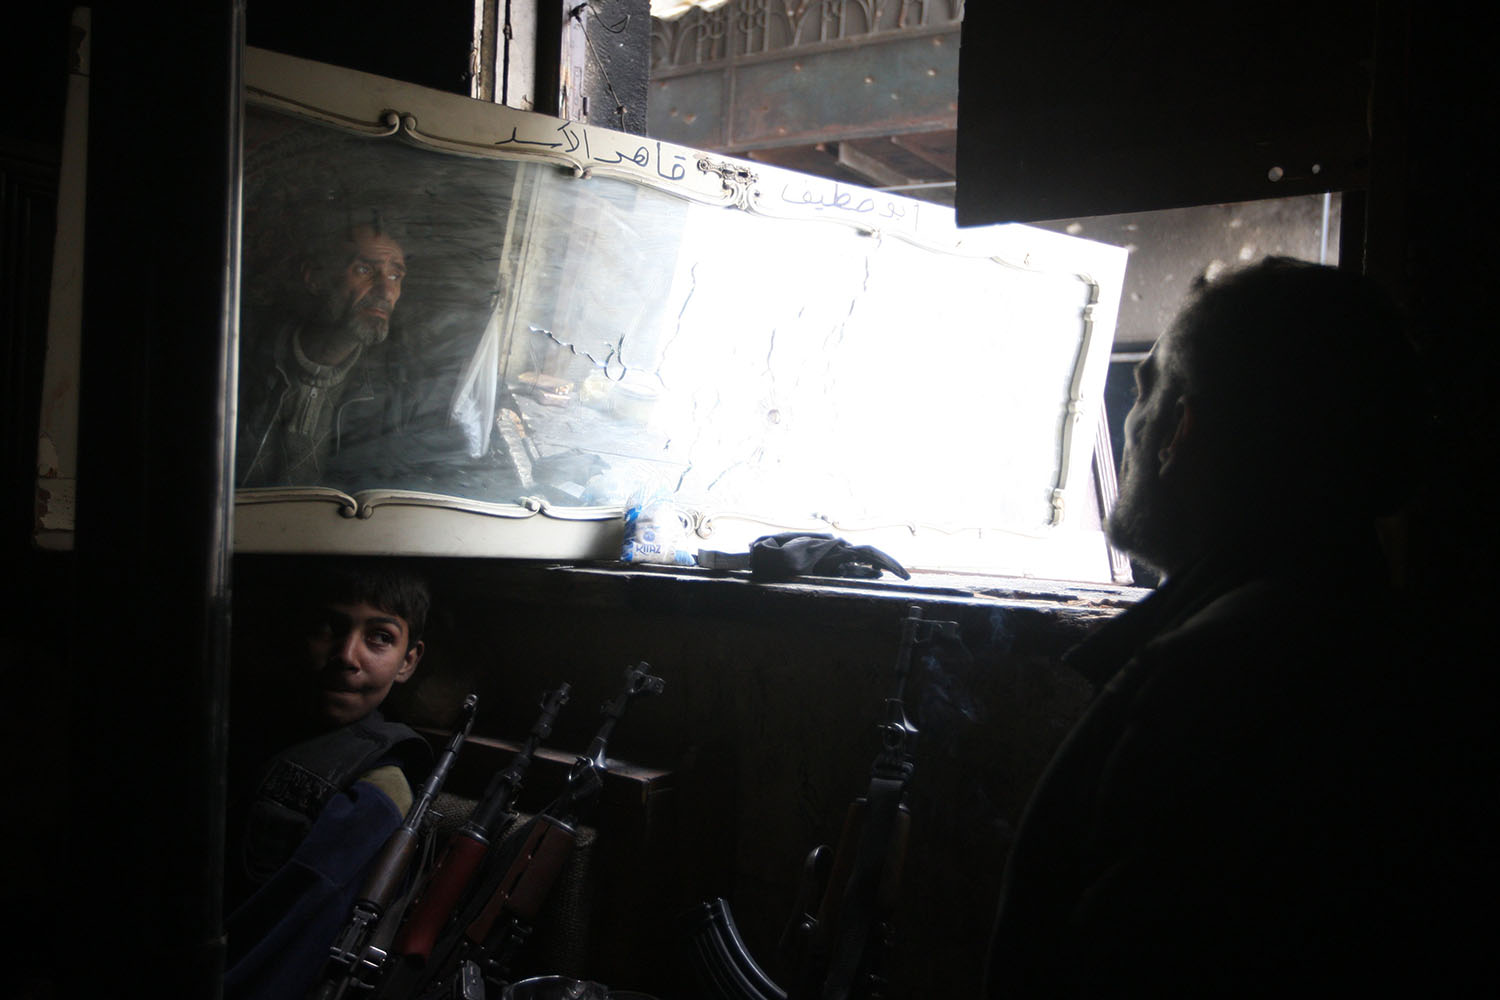 Mar. 3, 2014. A rebel fighter monitors through a miror the location of pro-regime fighters in the northern Syrian city of Aleppo.